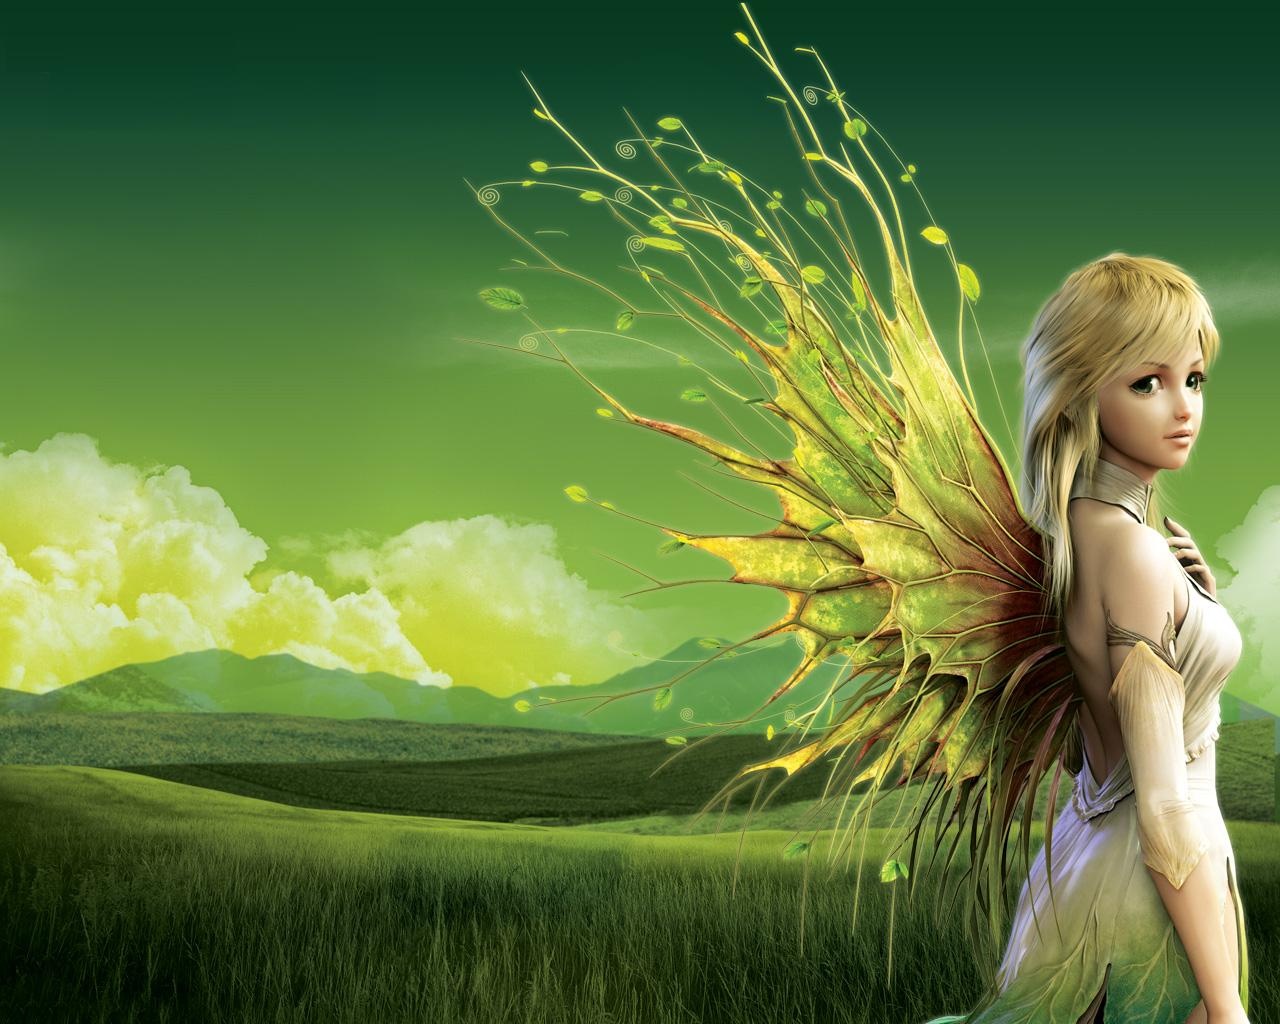 pixie wallpaper,people in nature,nature,green,natural landscape,cg artwork